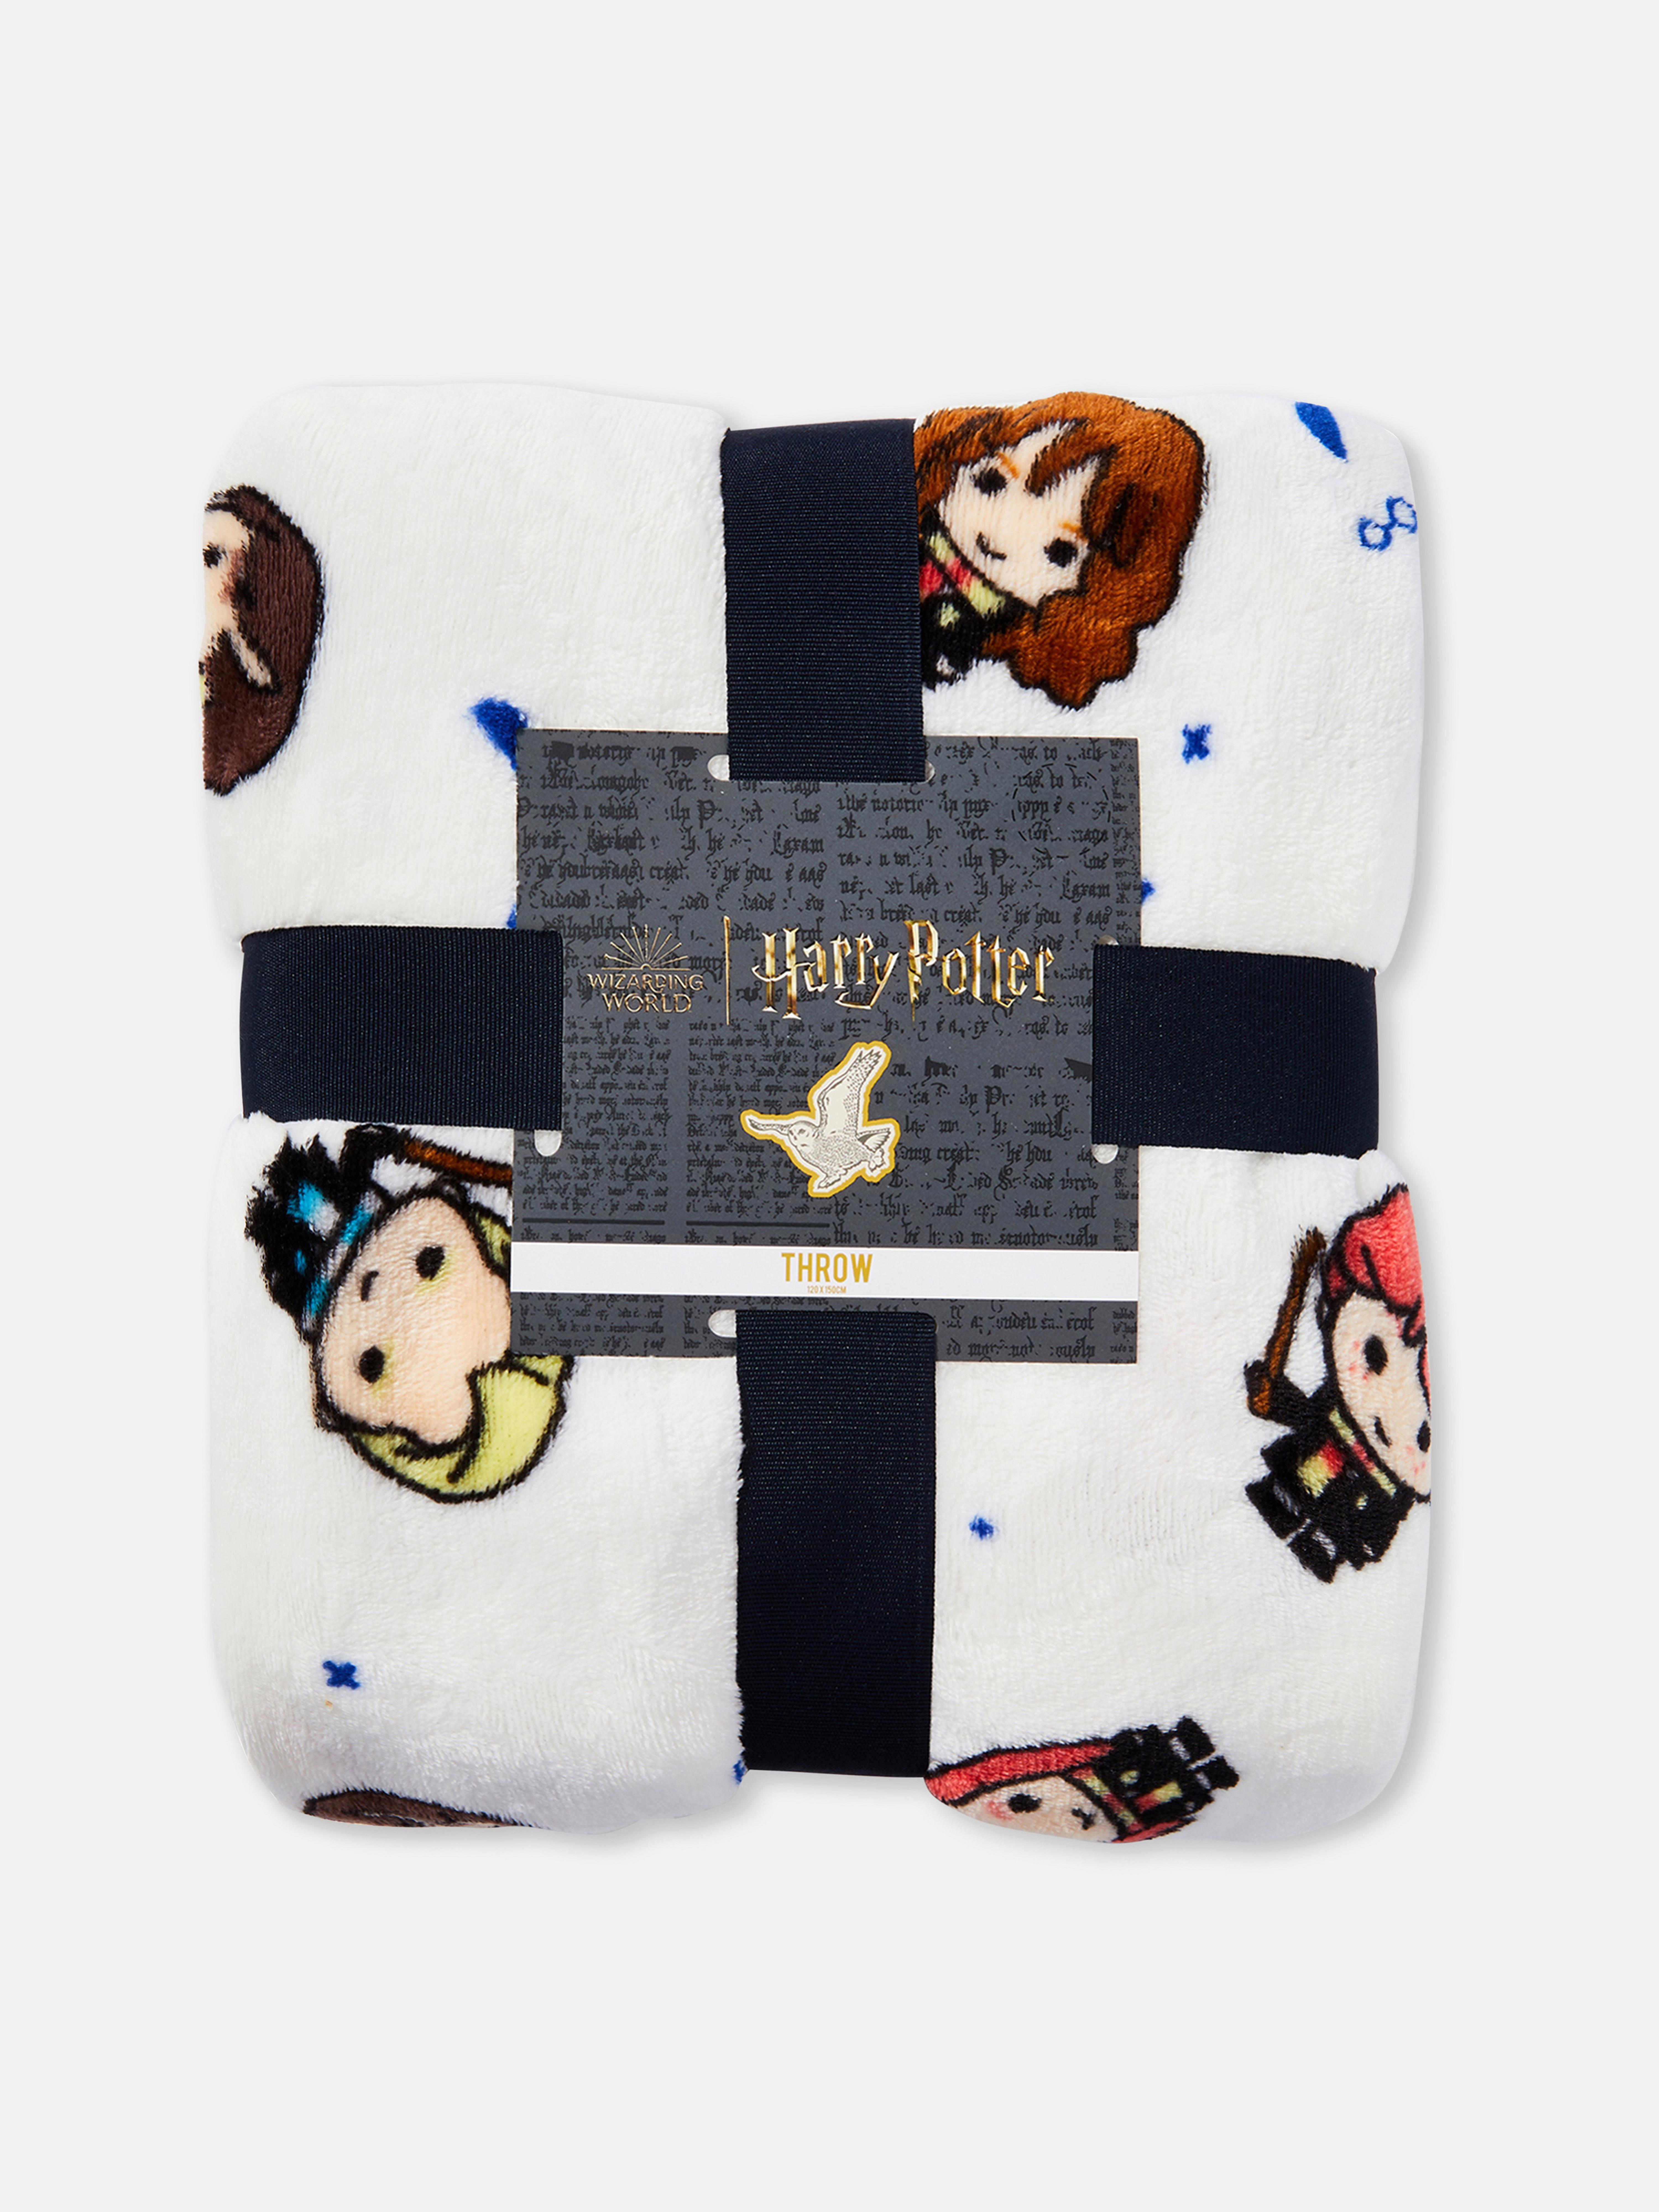 Harry Potter Printed Warm Cosy Sherpa Throw Blanket Home Decor Themed Primark 